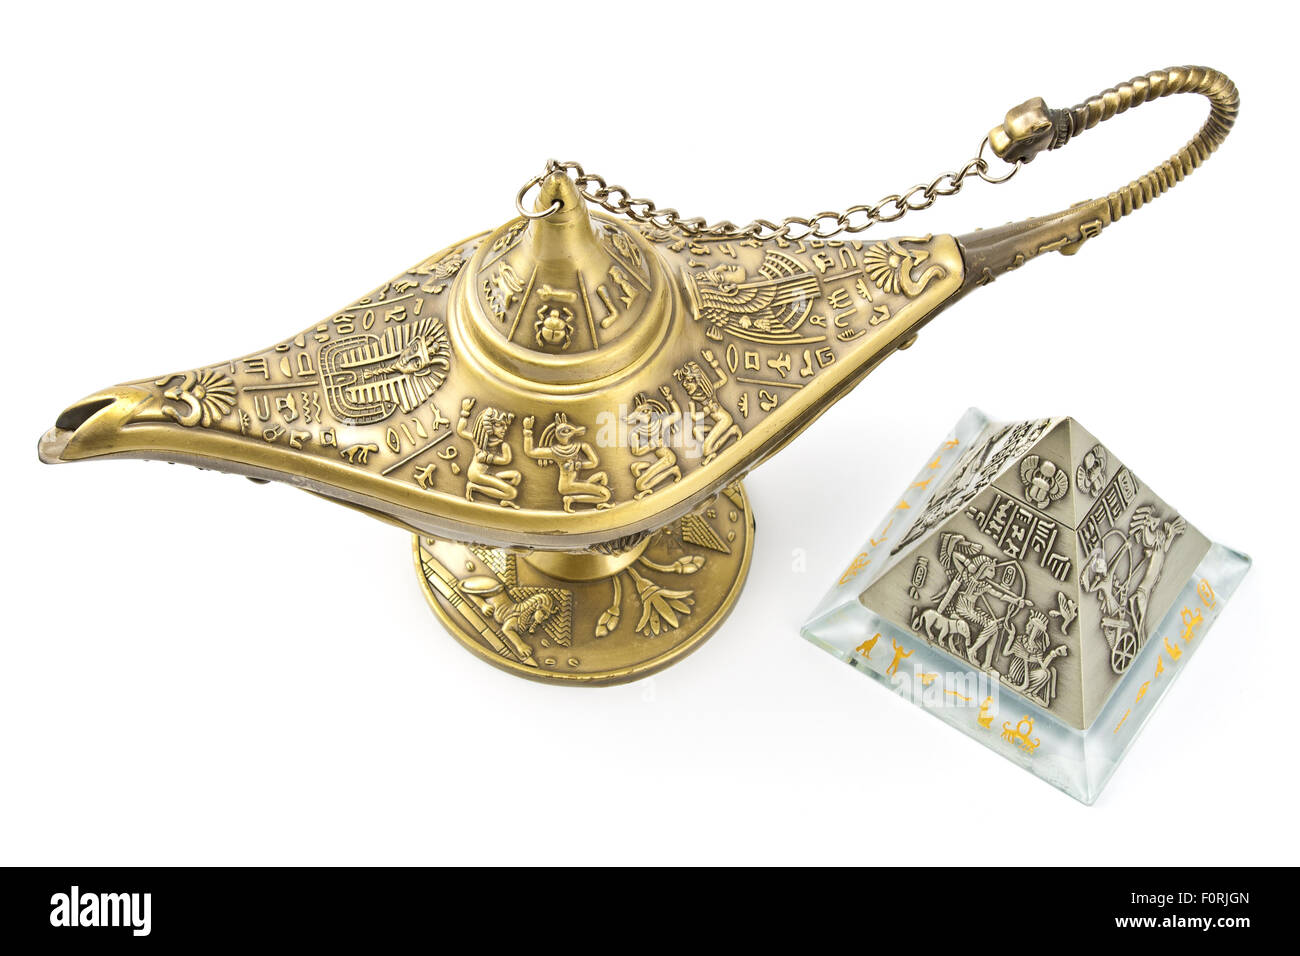 Genie magique et lampe pyramide laiton isolated on white Banque D'Images